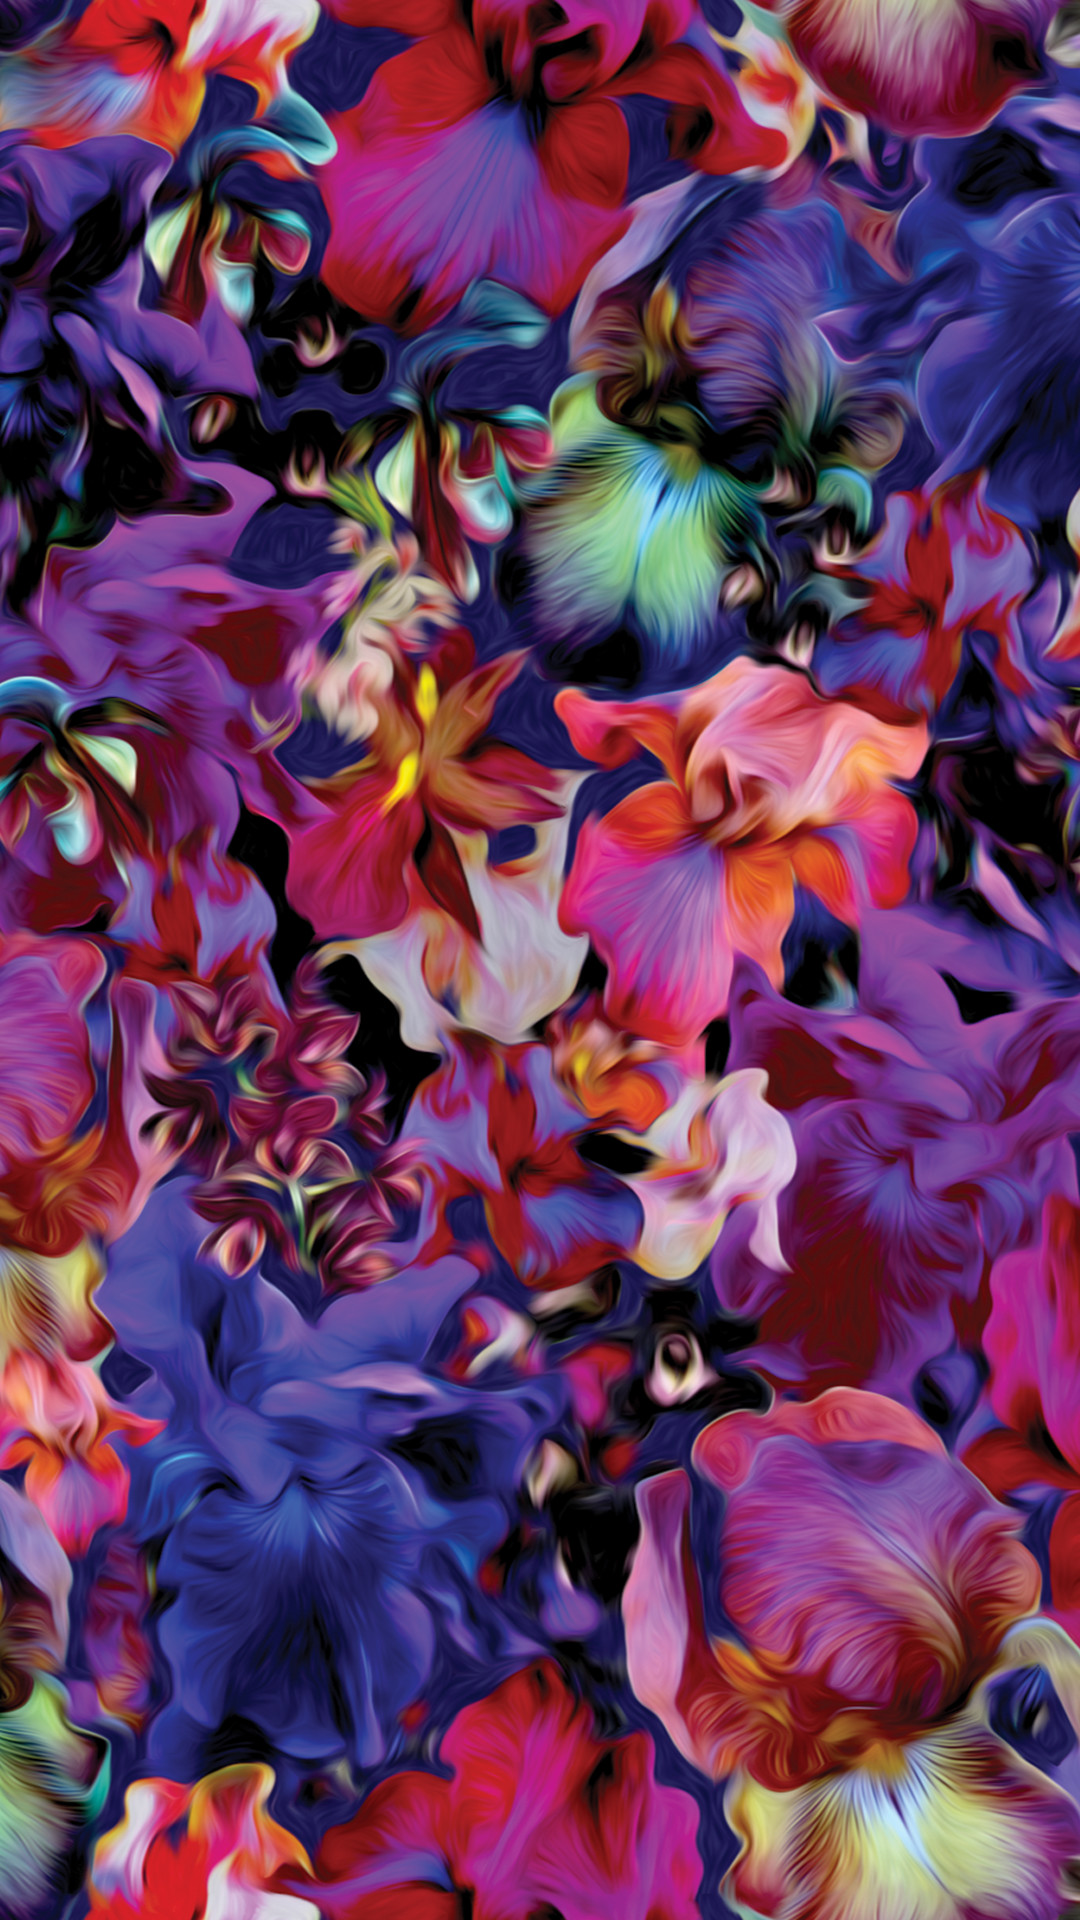 1080x1920 Lush Floral/Beaming Orchid